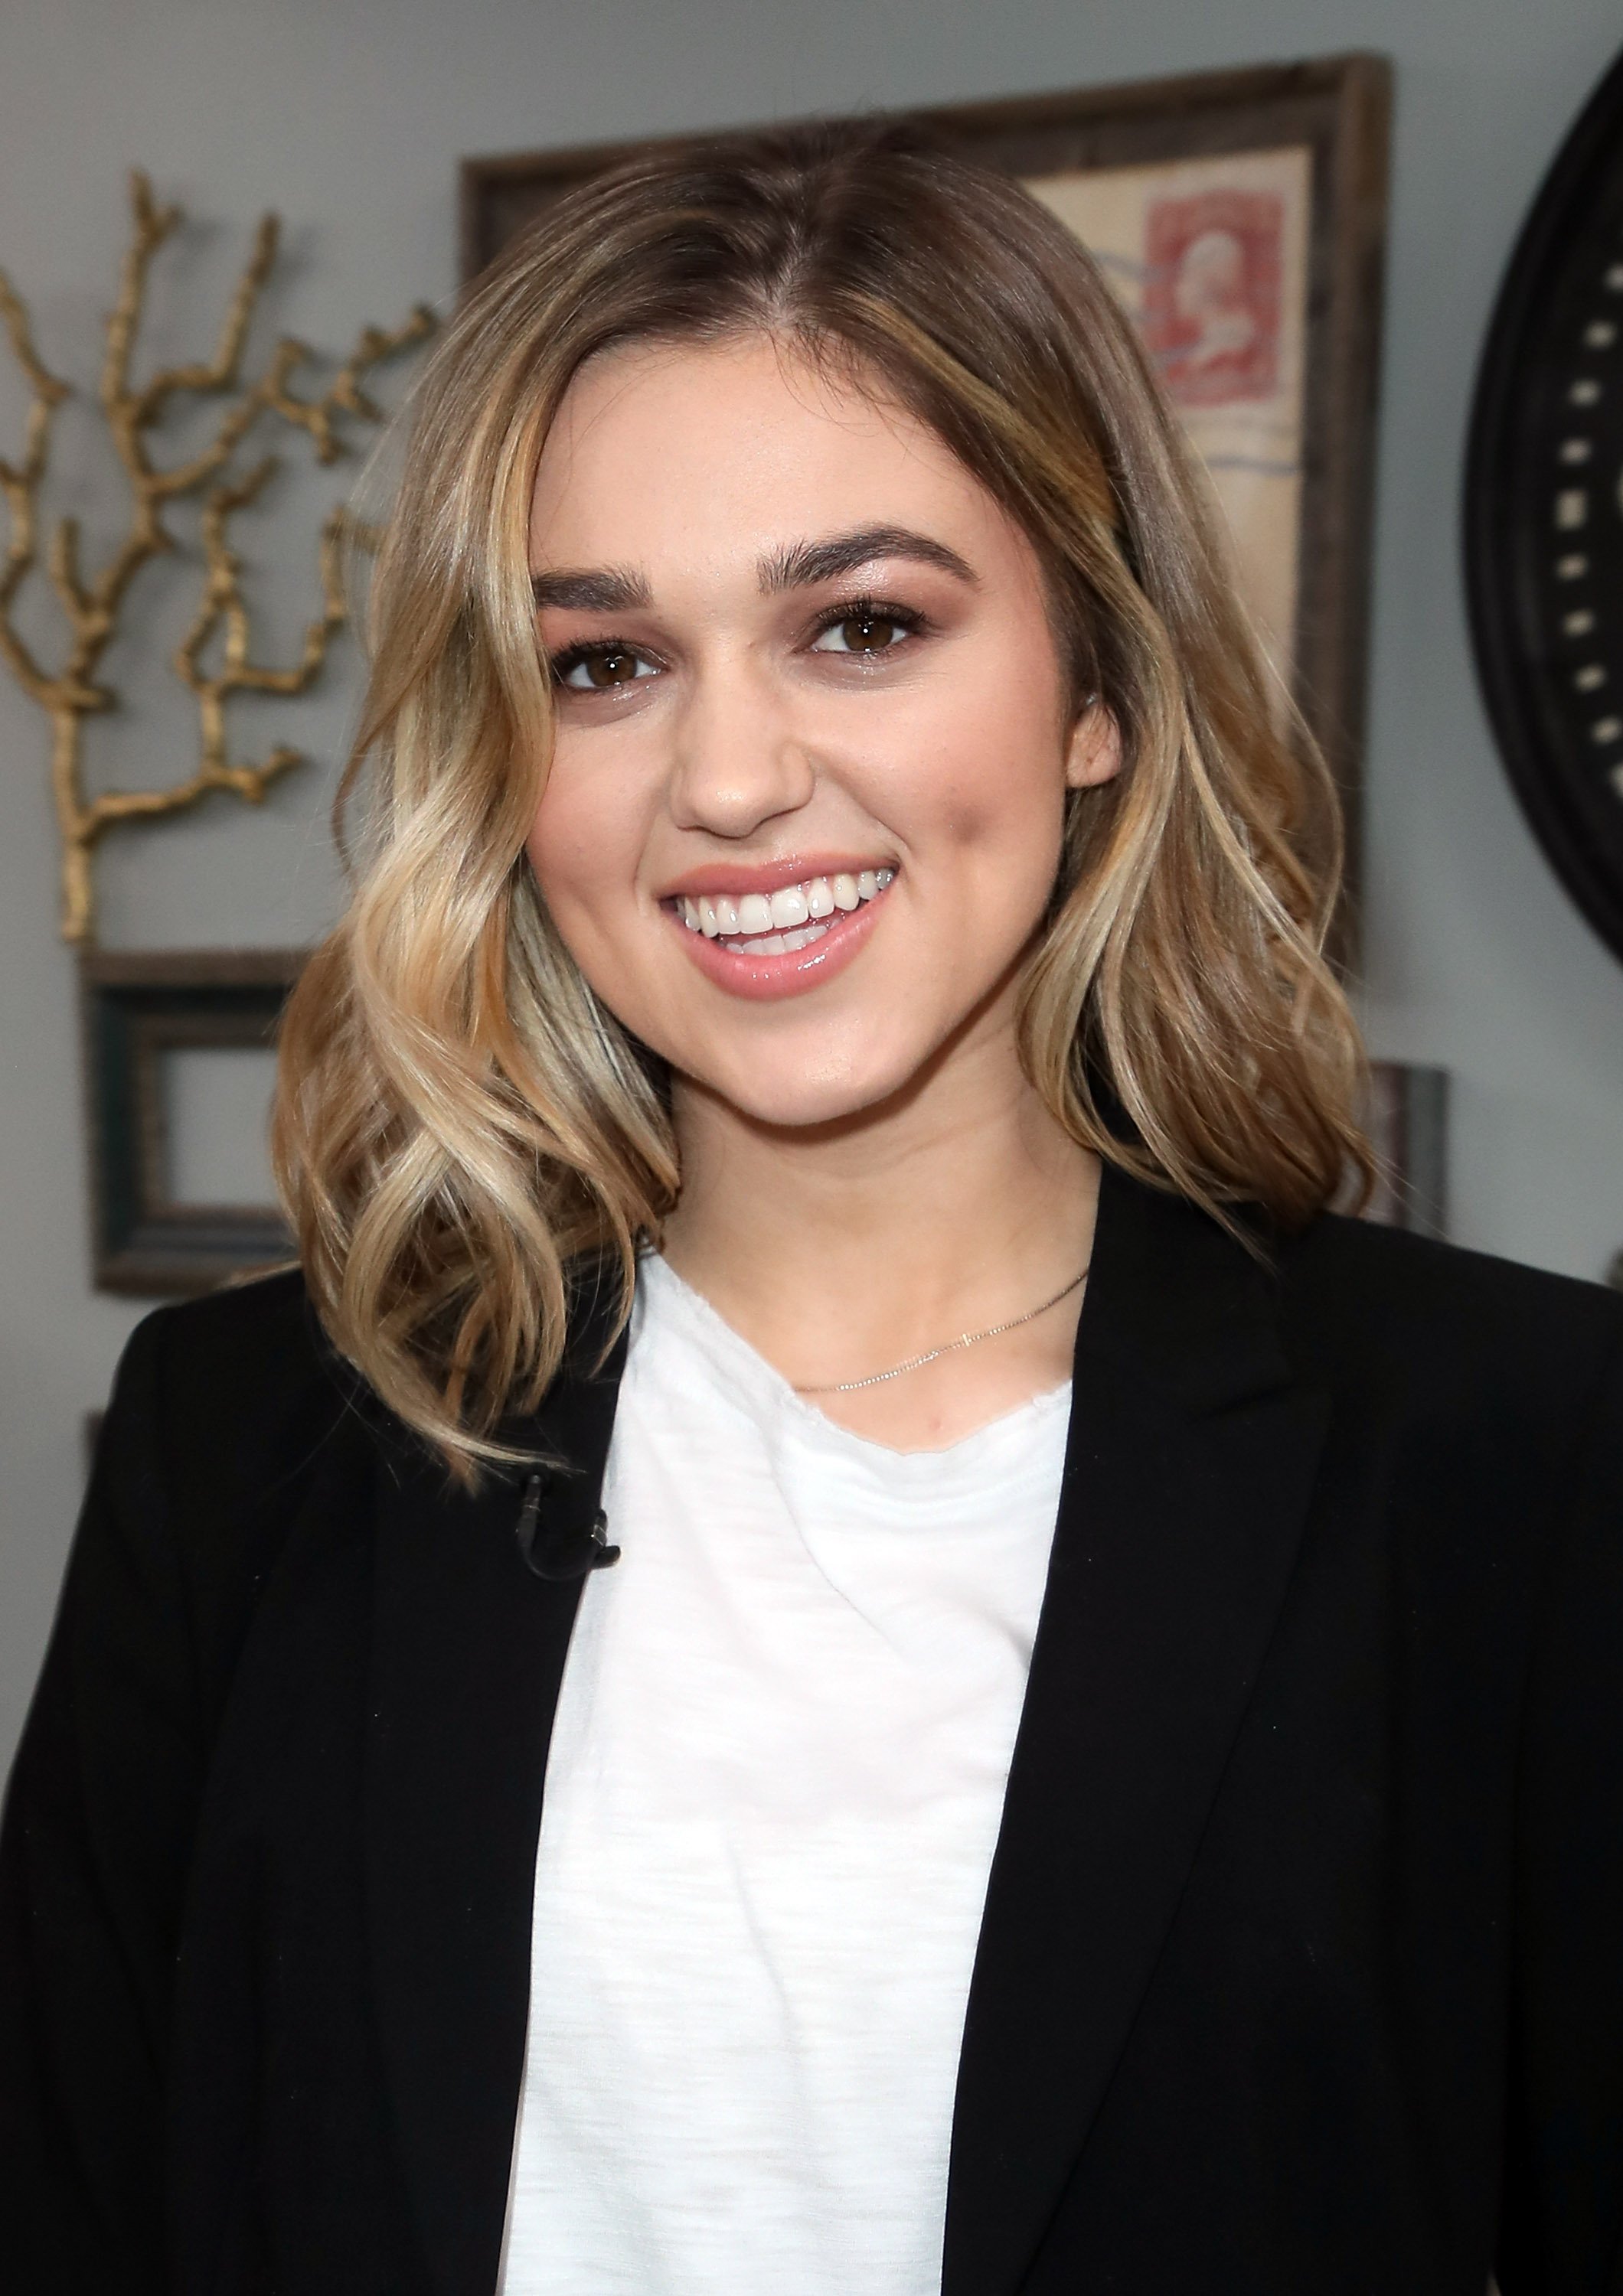 Sadie Robertson poses for a photo at Hallmark's "Home & Family" at Universal Studios Hollywood on March 27, 2018, in Universal City, California | Source: Getty Images